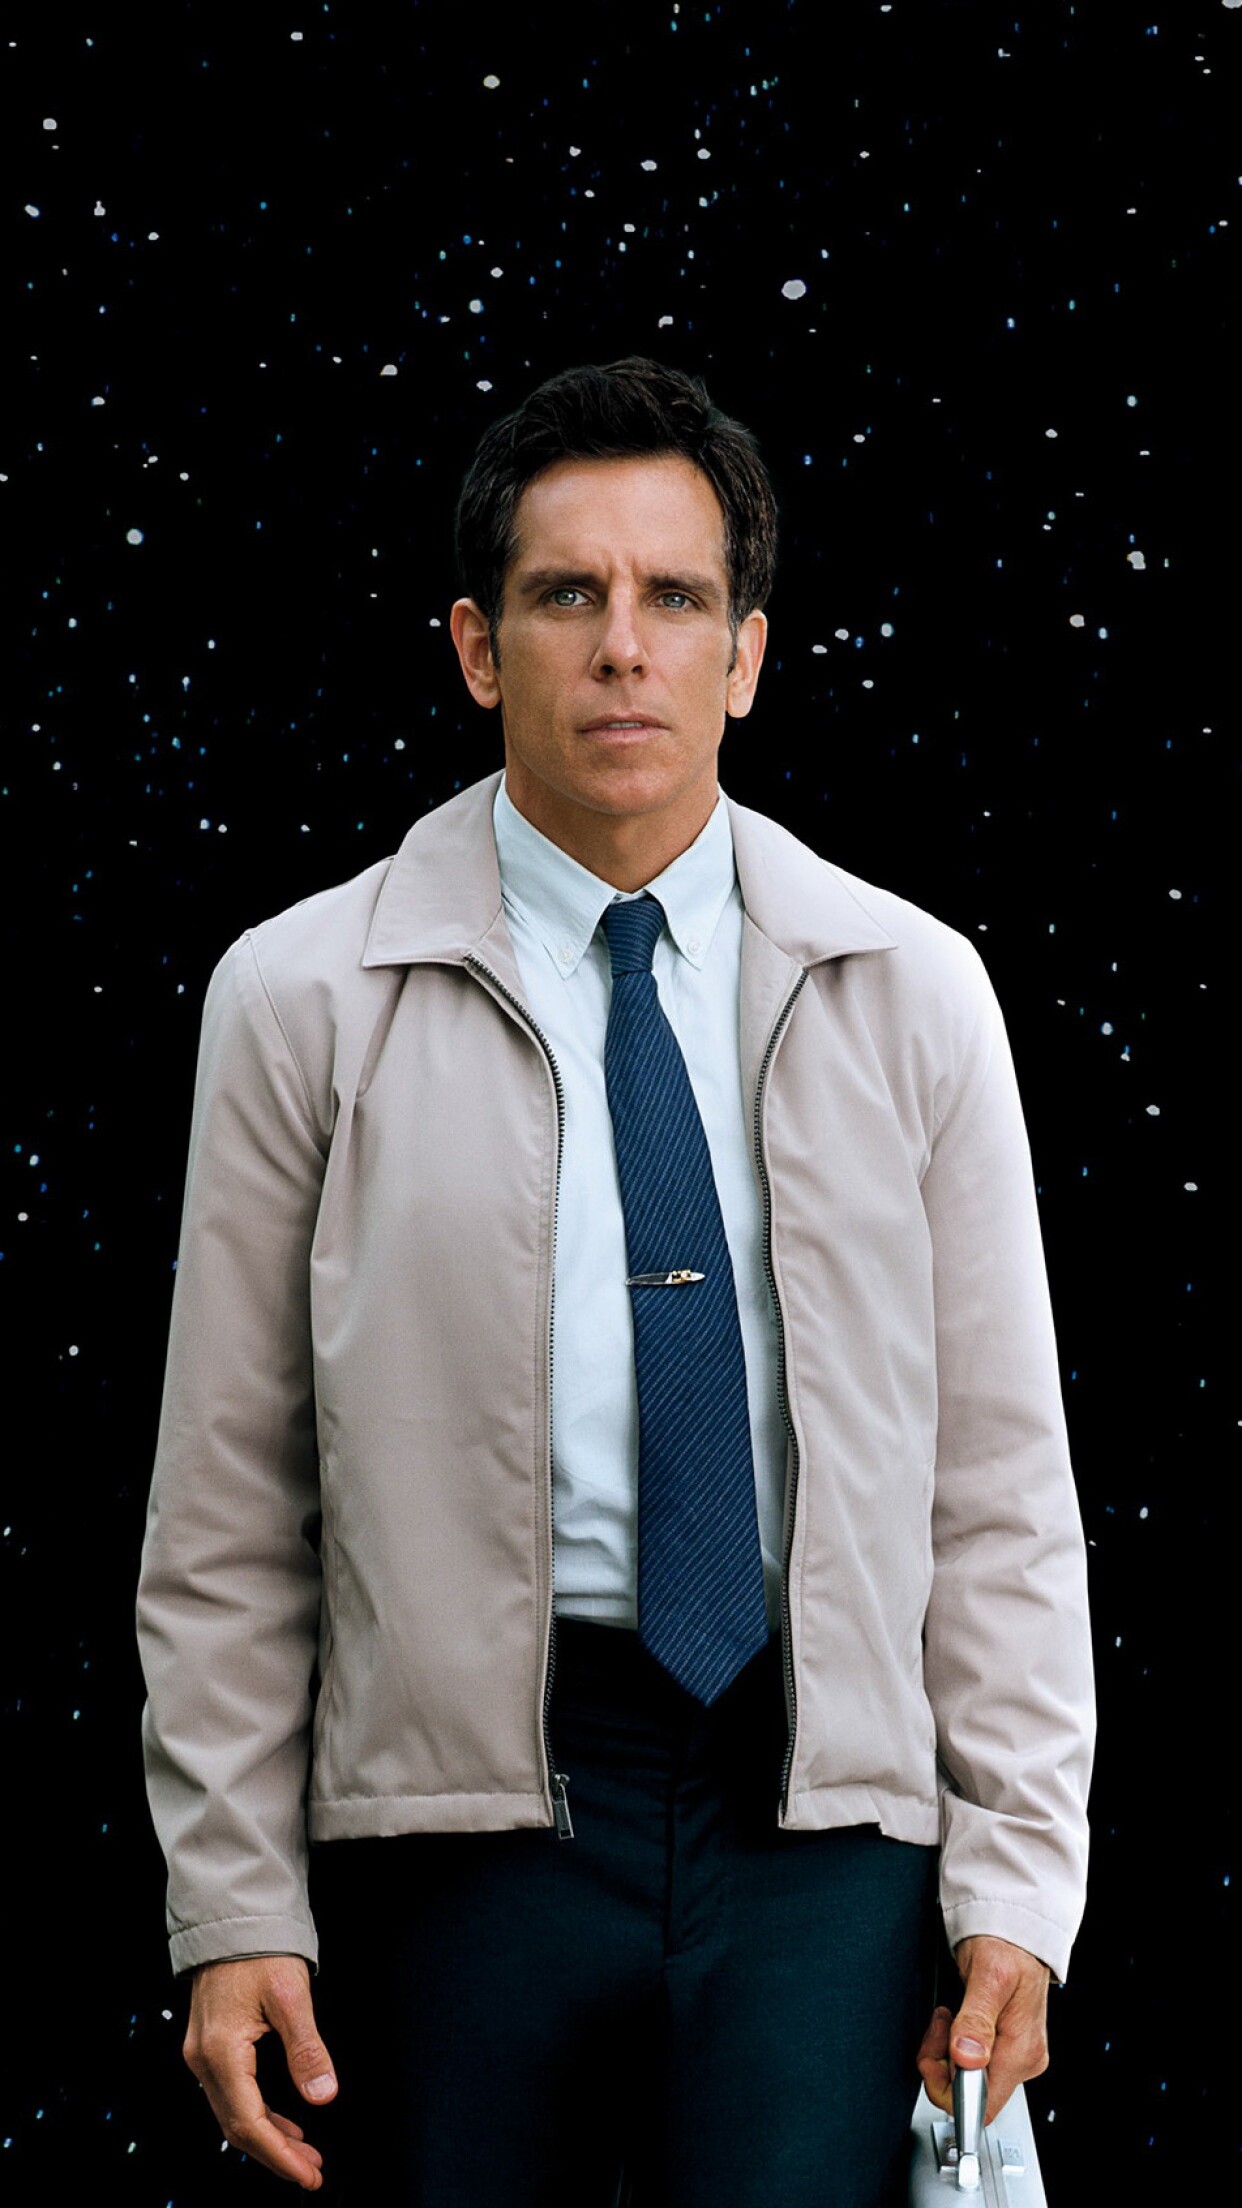 The Secret Life of Walter Mitty: The film’s first half concerns Walter’s workday, his smug new boss’ executive entourage poking fun at his virtually unconscious daydreaming like high school bullies. 1250x2210 HD Wallpaper.